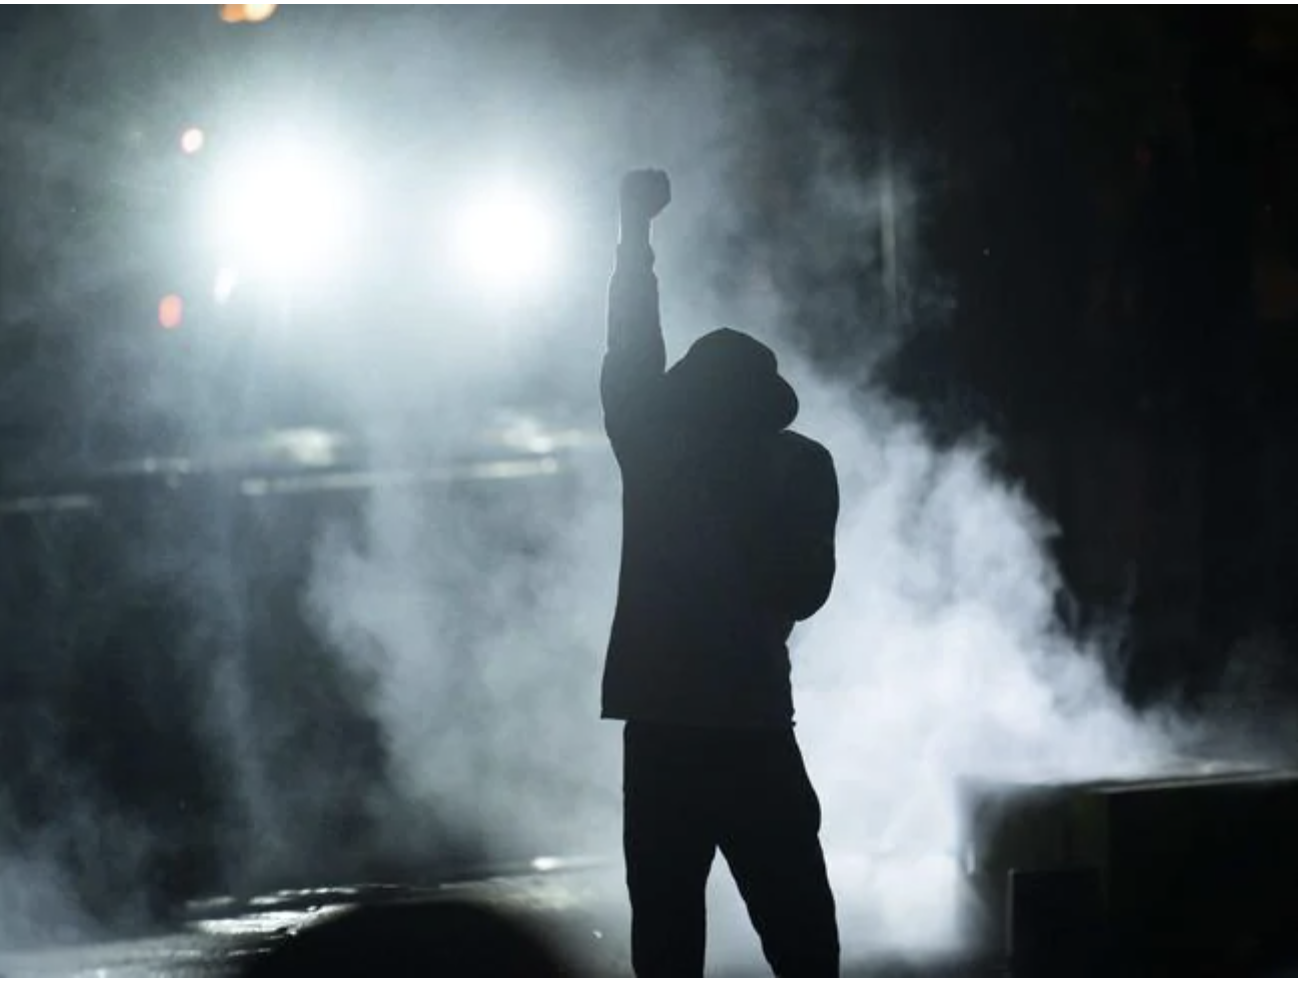 A protester holds up a fist in a cloud of tear gas outside the Third Police Precinct building in Minneapolis, Minnesota. Picture: Stephen Maturen/Getty Images/AFP A protester holds up a fist in a cloud of tear gas outside the Third Police Precinct building in Minneapolis, Minnesota. Picture: Stephen Maturen/Getty Images/AFPSource:AFP